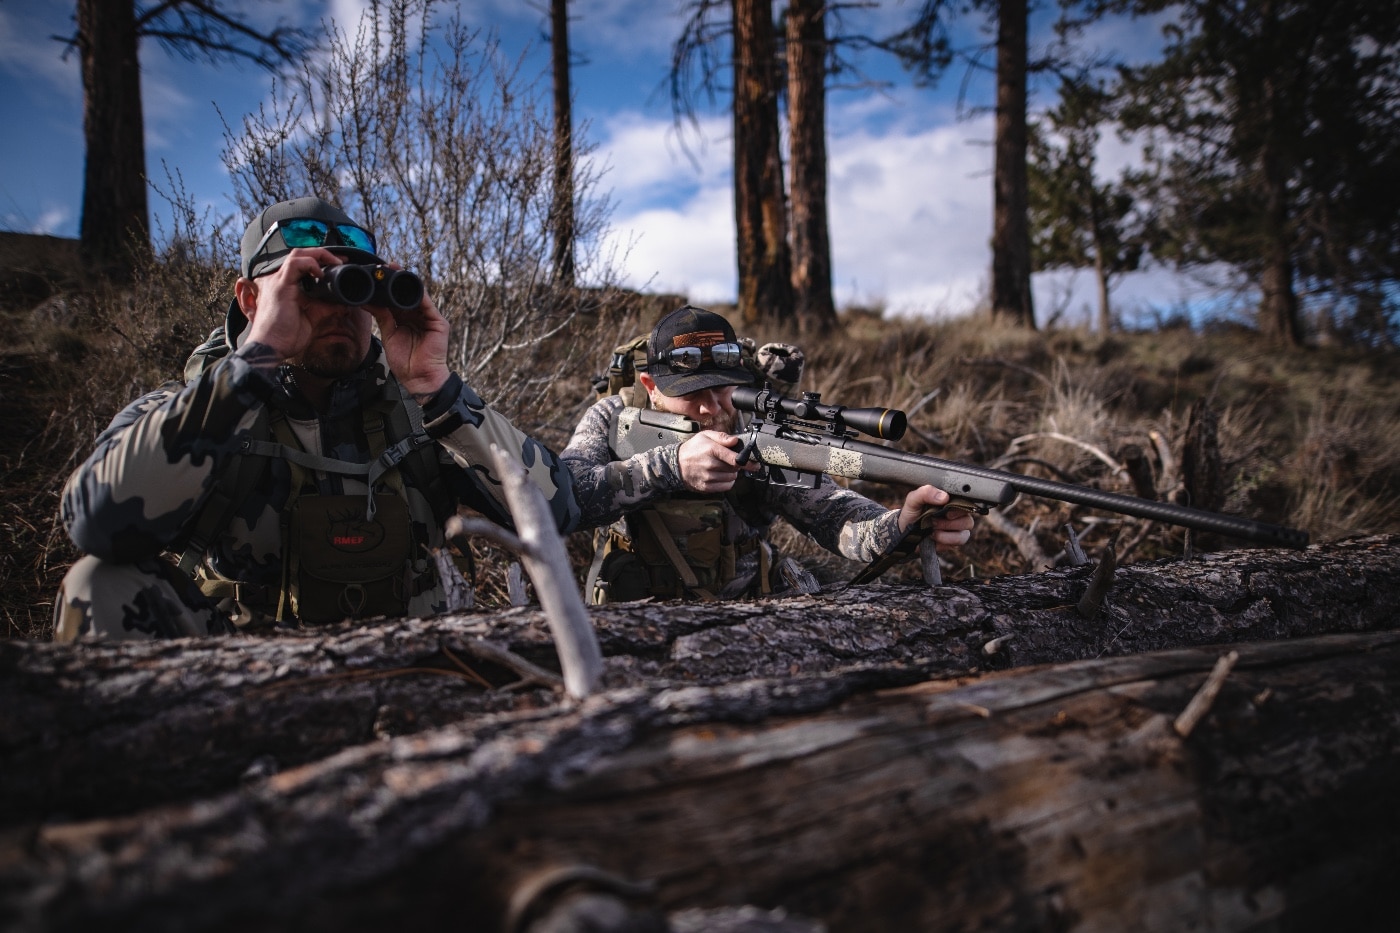 Springfield Waypoint Model 2020 Long Action hunting rifle